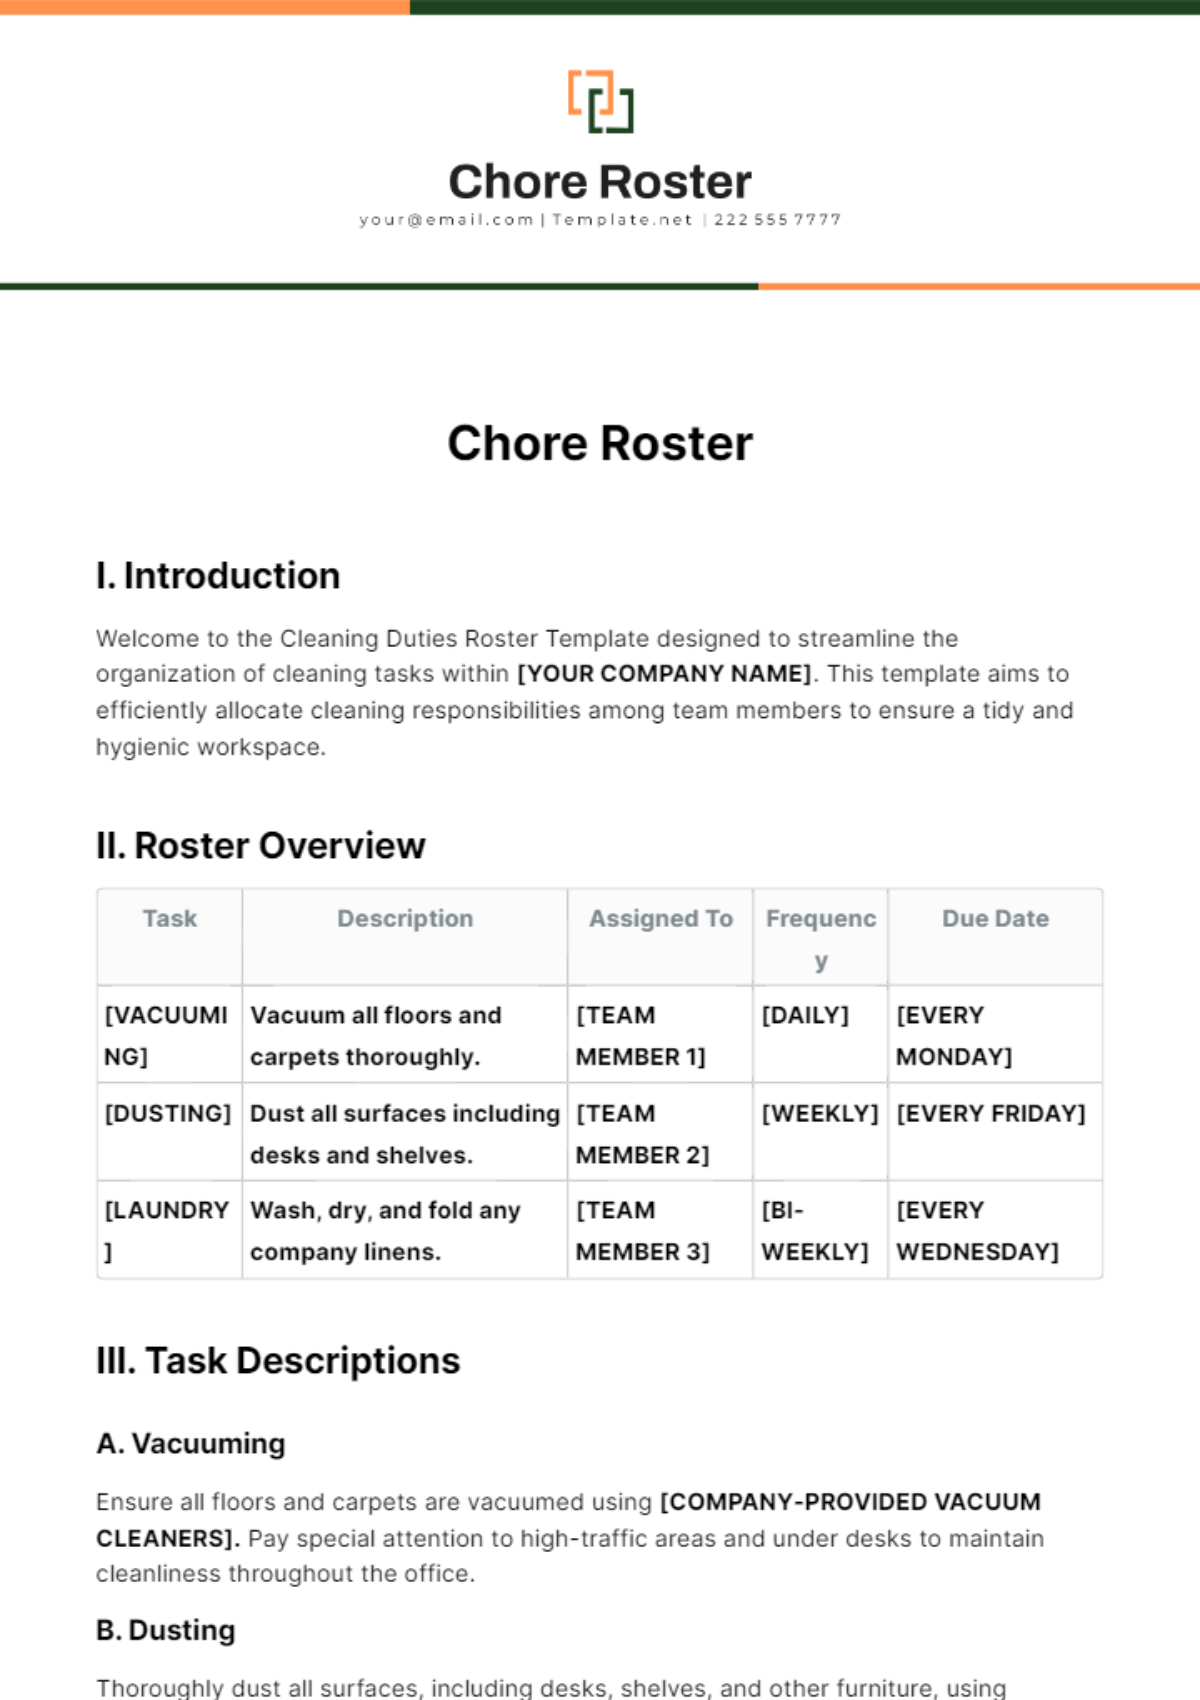 Chore Roster Template